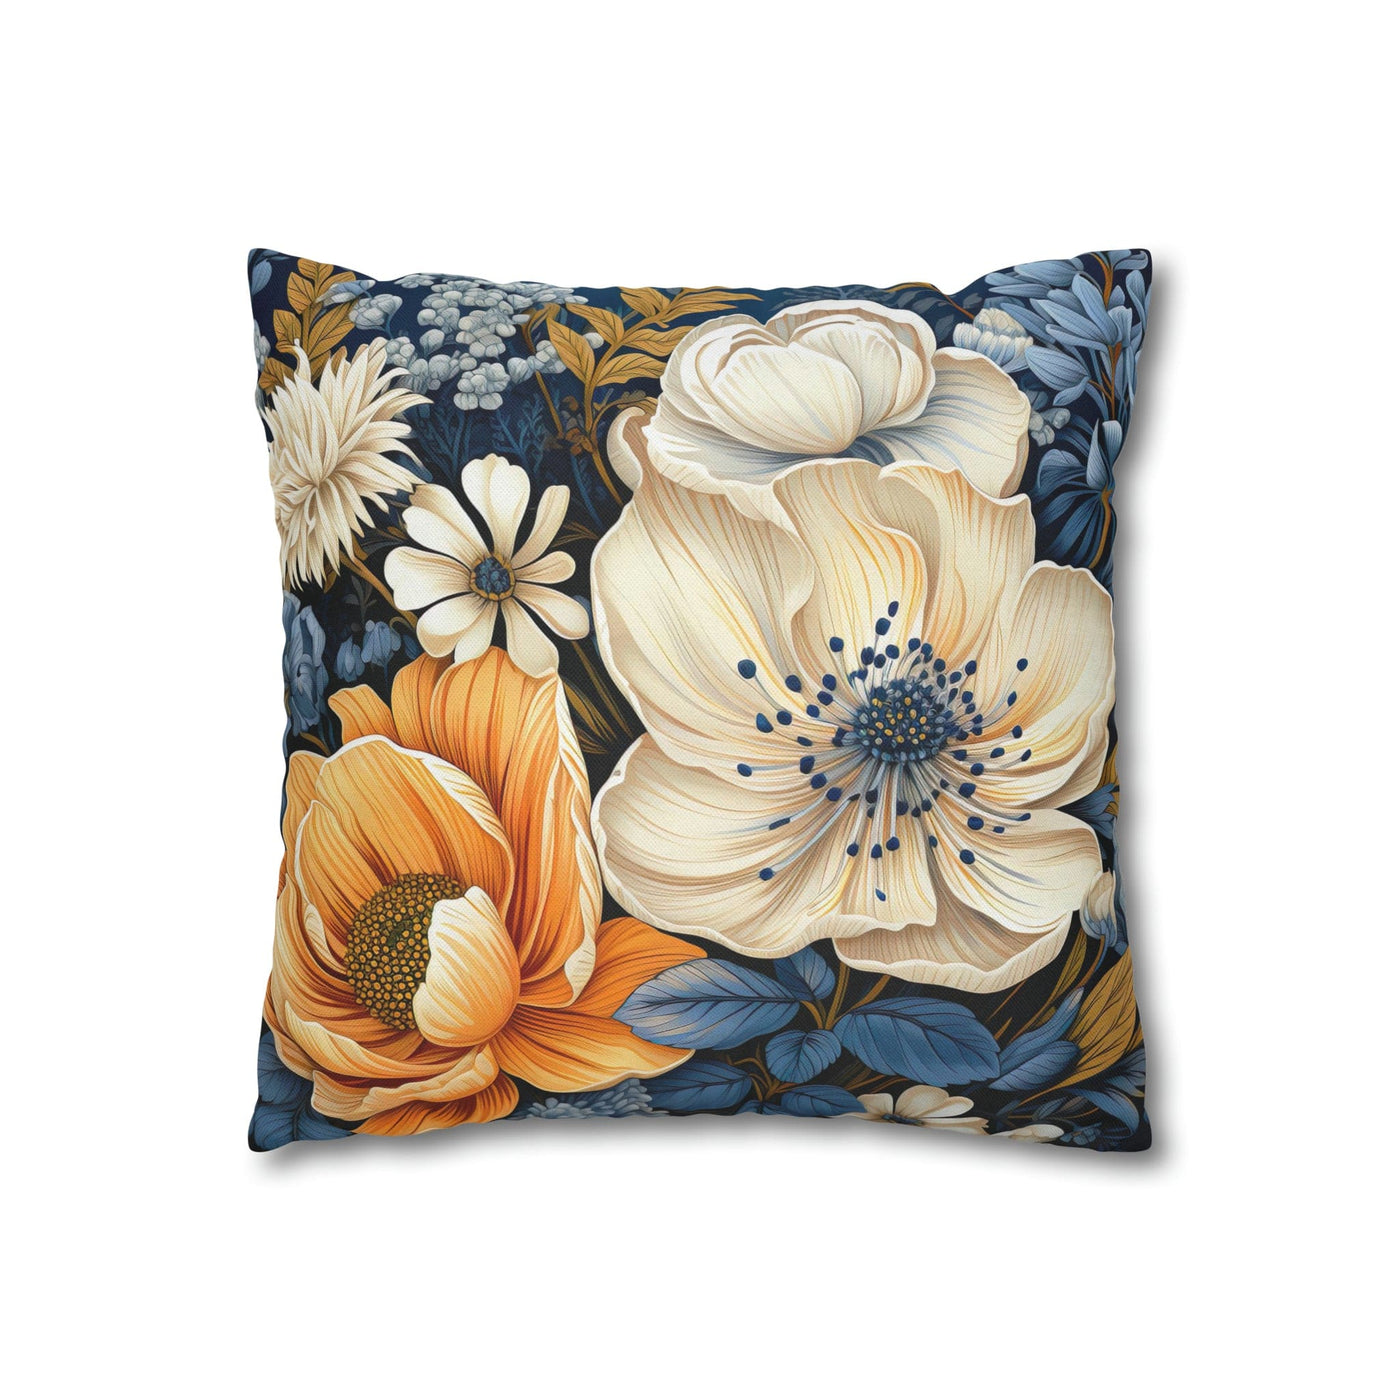 Decorative Throw Pillow Covers With Zipper - Set Of 2 Blue Floral Block Print